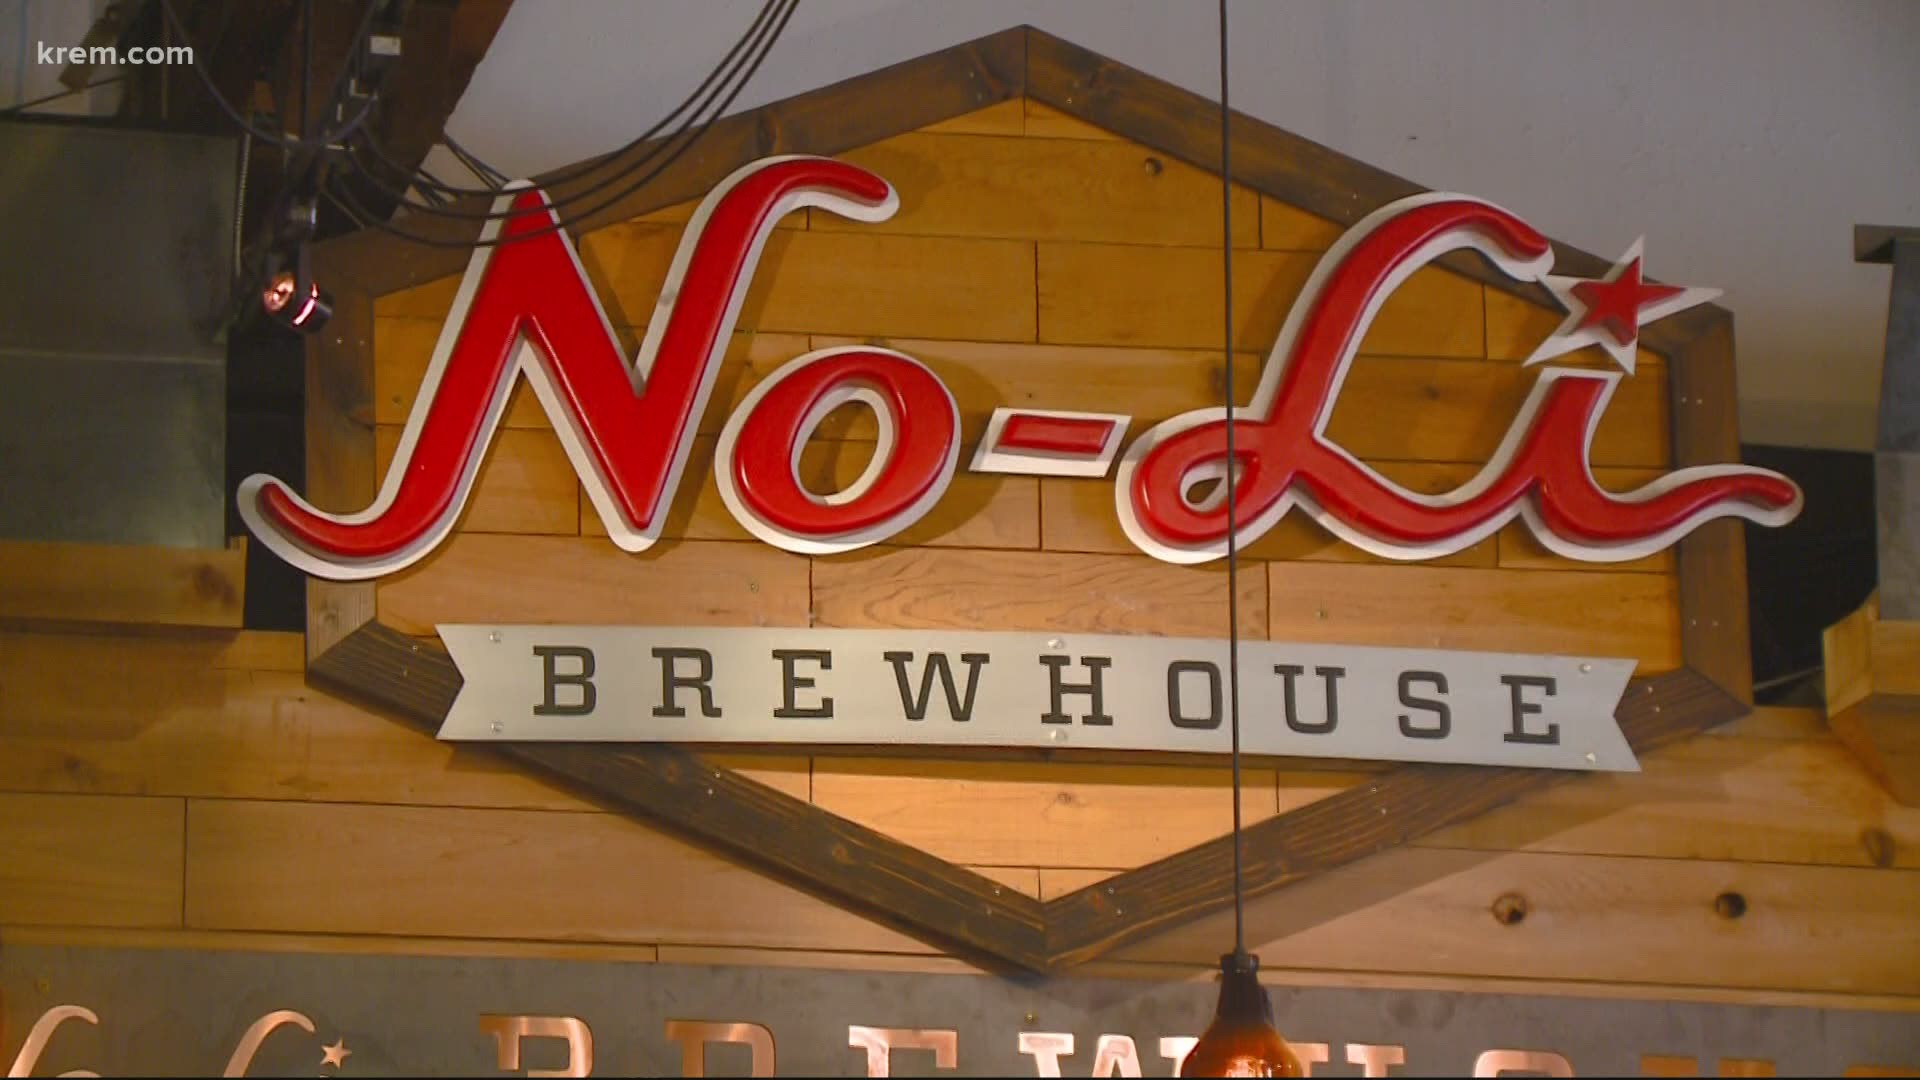 No-Li Brewhouse is giving away hundreds of free snow shovels to anyone who promises to pay it forward by shoveling a driveway for a neighbor or a friend.